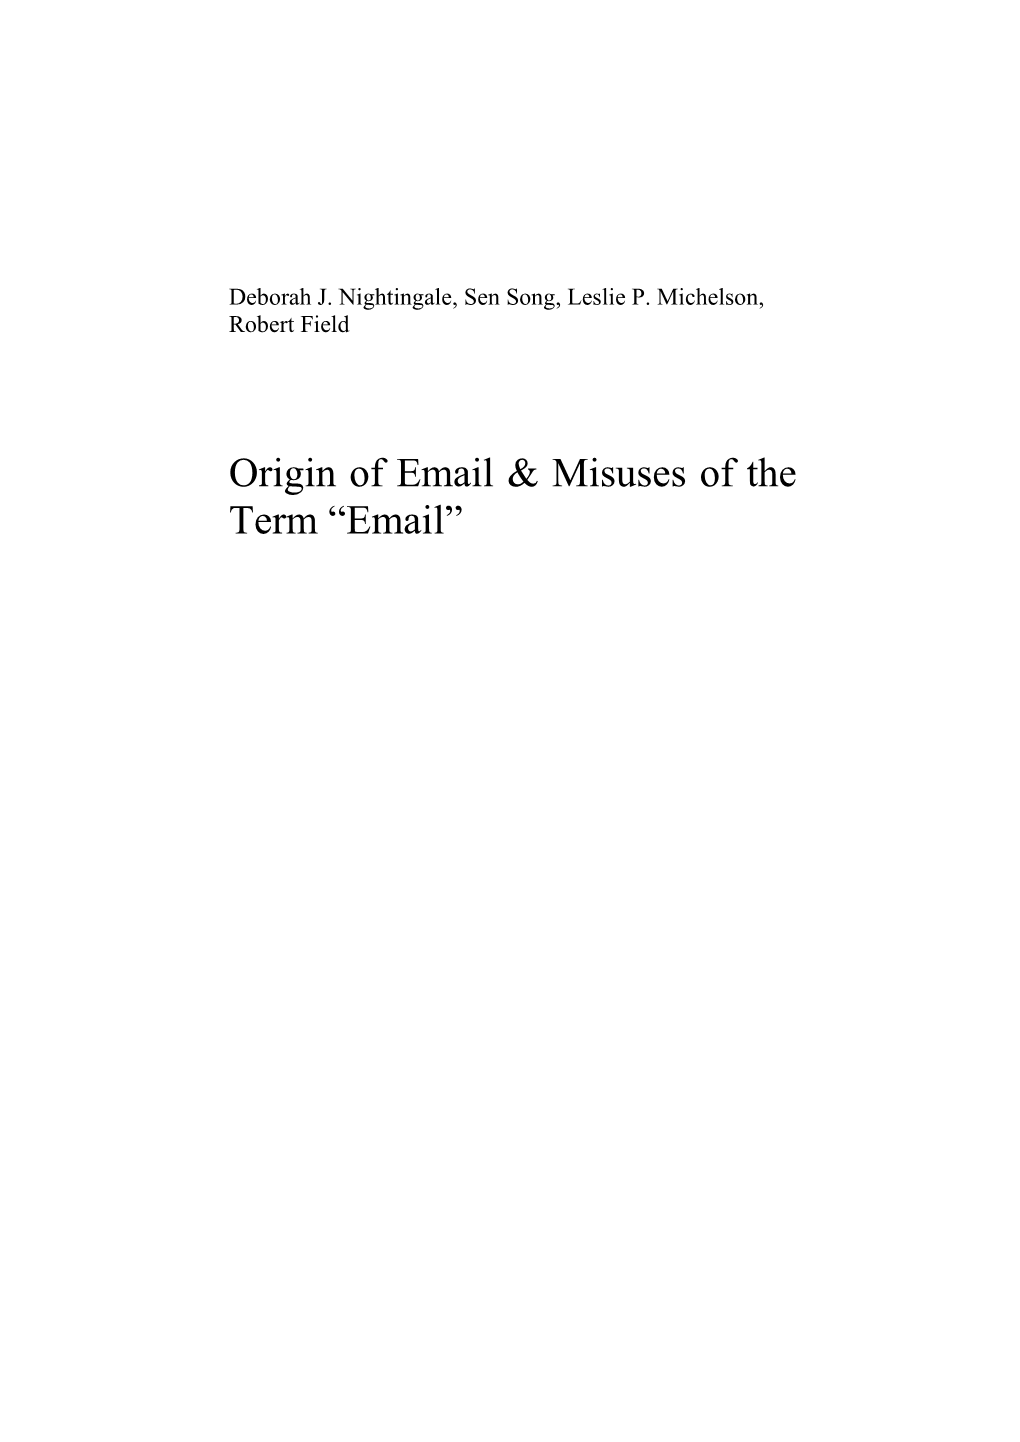 Origin of Email & Misuses of the Term “Email”